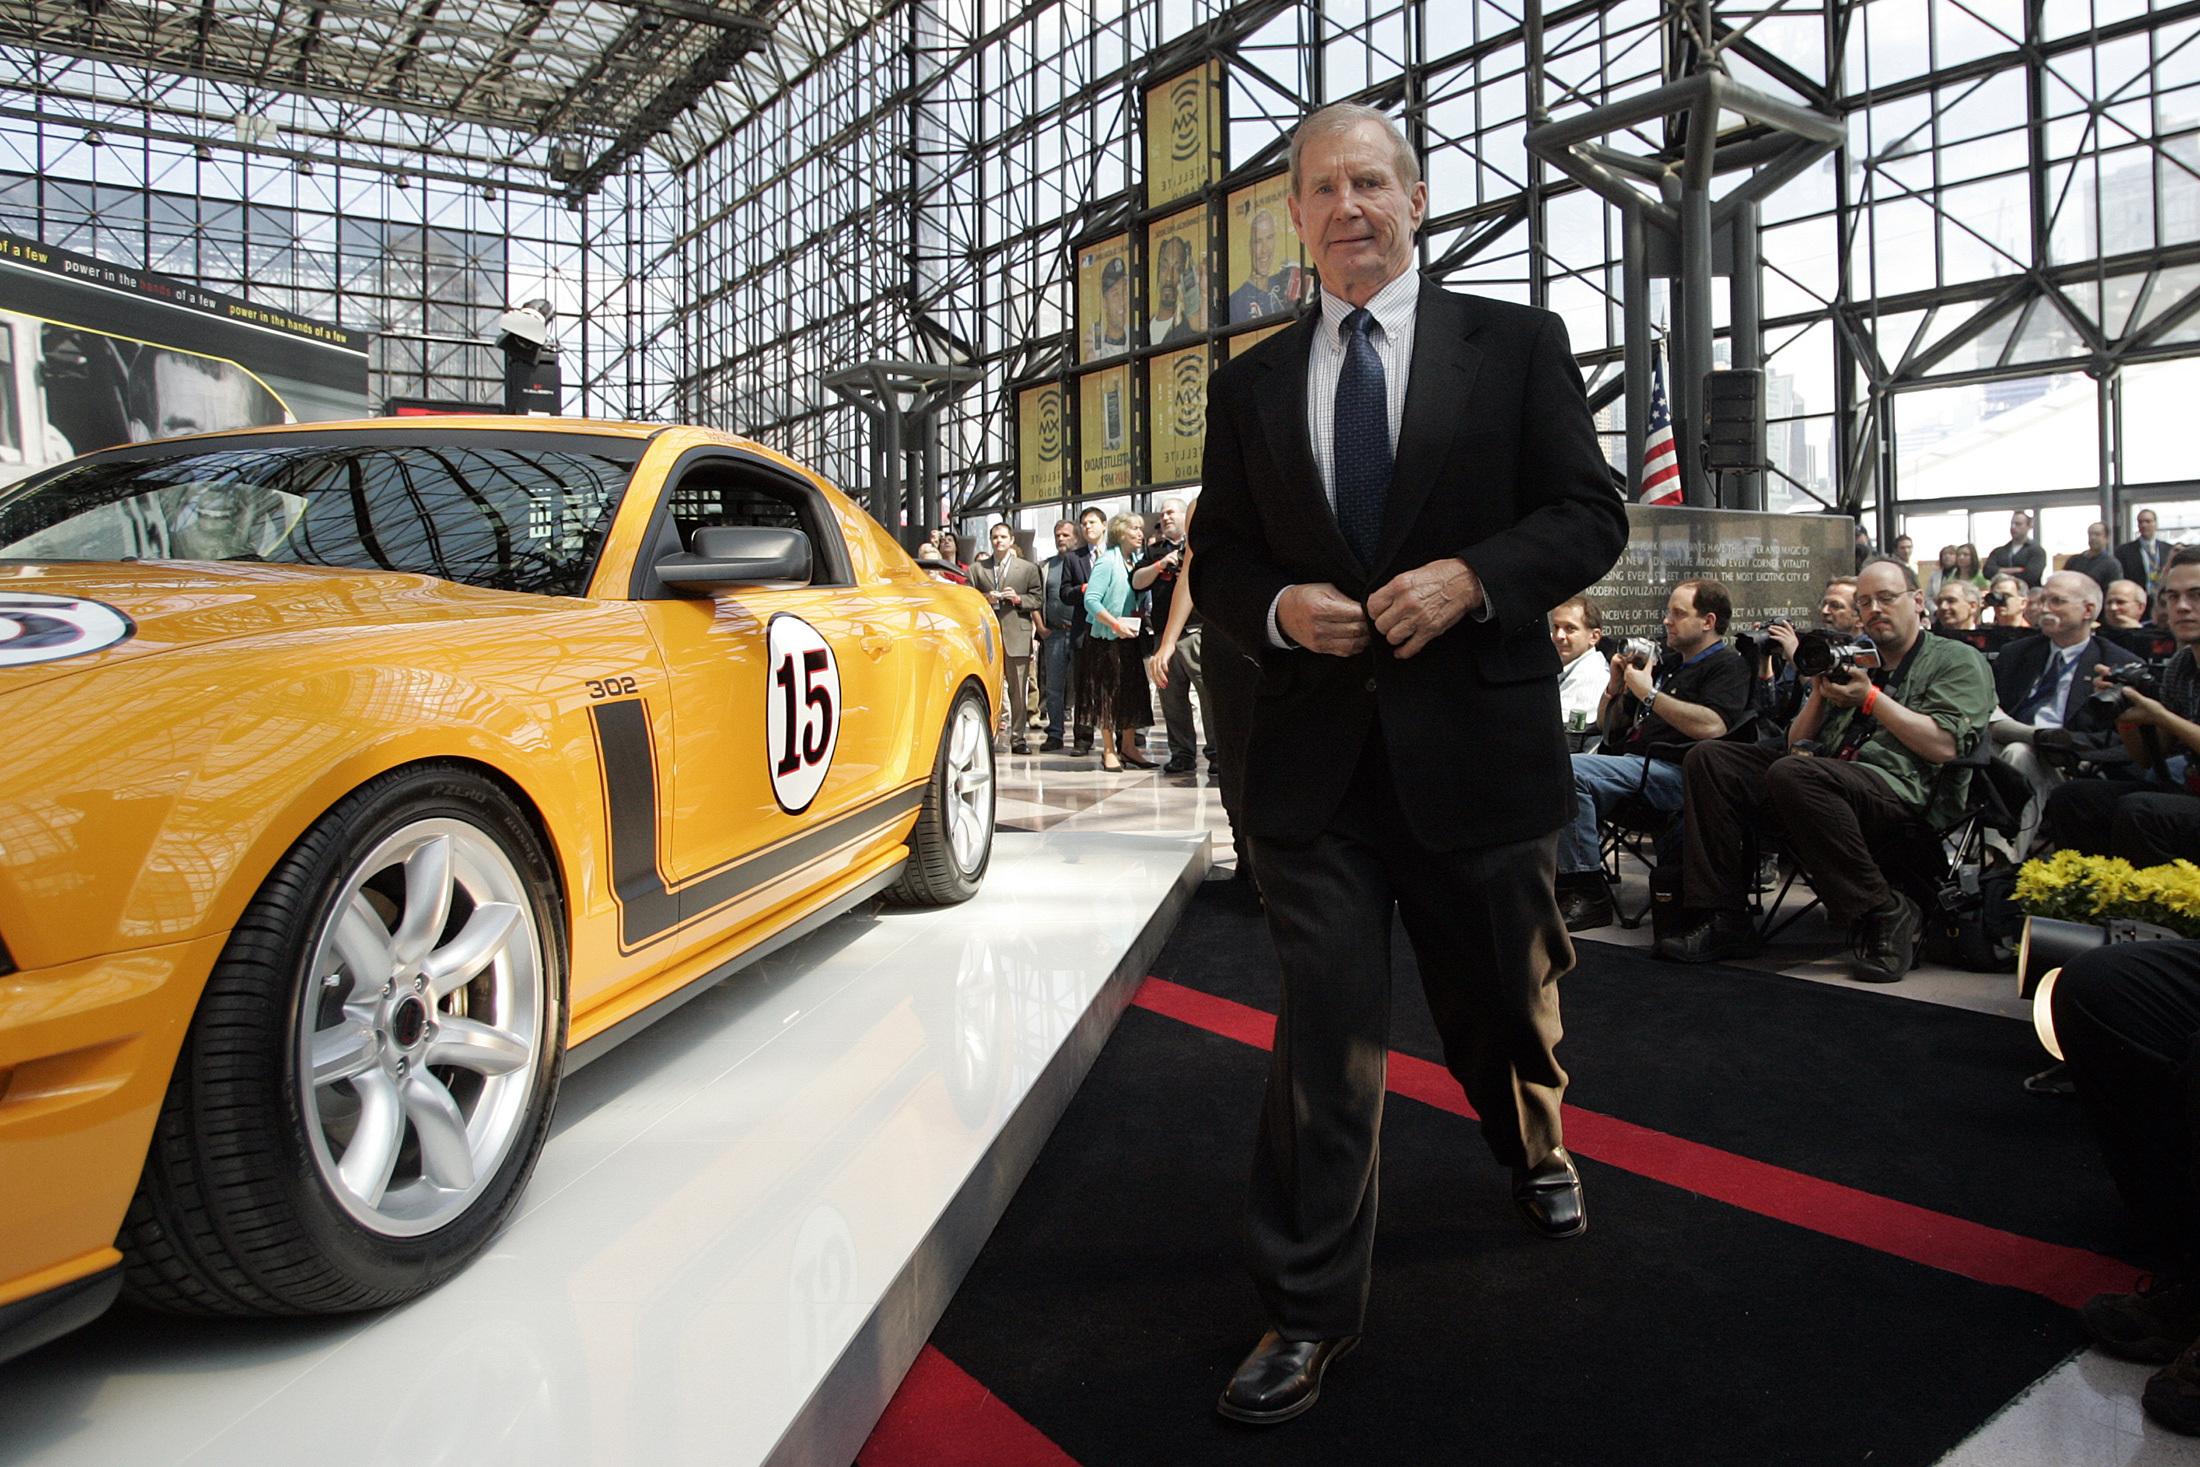 Race car driver Jones takes stage for unveiling of 370-horsepower Saleen modified Mustang at New York International Auto Show